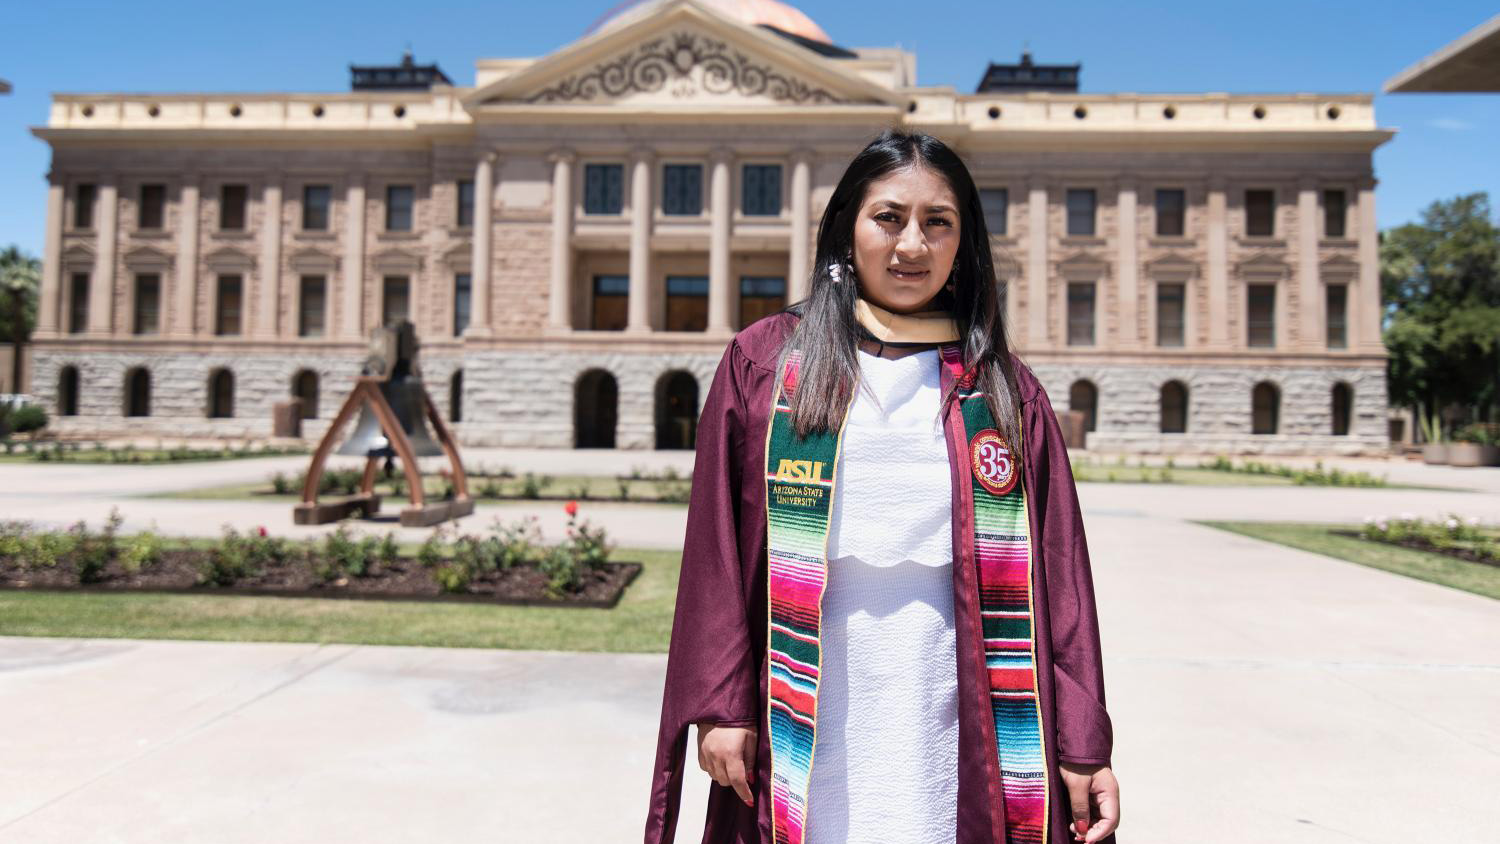 Blanca Sierra Reyes, 27, applied for DACA eight years ago and has renewed every two years since. She graduated with a master's degree in social work from ASU in spring 2019, an achievement she said would not have been possible without DACA.